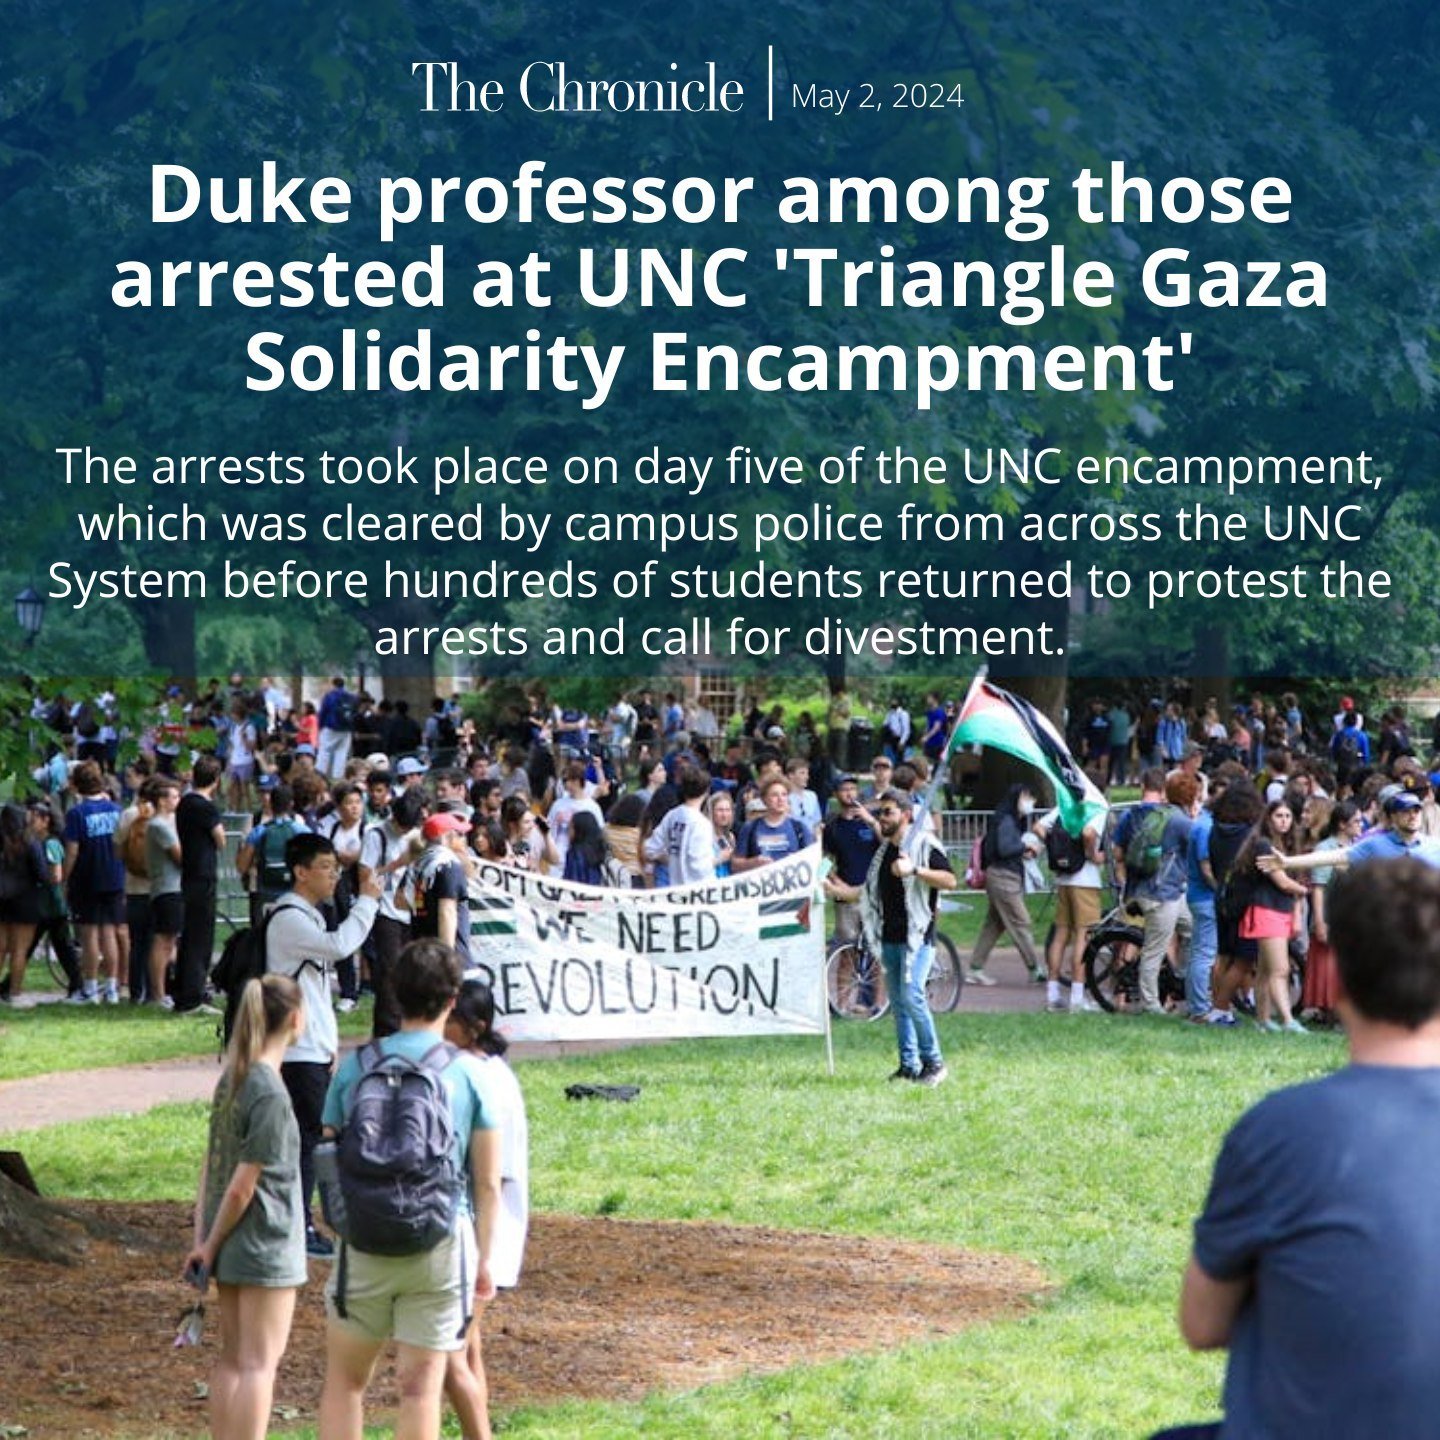 A Duke faculty member said she was arrested alongside other demonstrators at the University of North Carolina at Chapel Hill&rsquo;s campus Tuesday morning after taking part in the &ldquo;Triangle Gaza Solidarity Encampment.&rdquo;

The Triangle Gaza